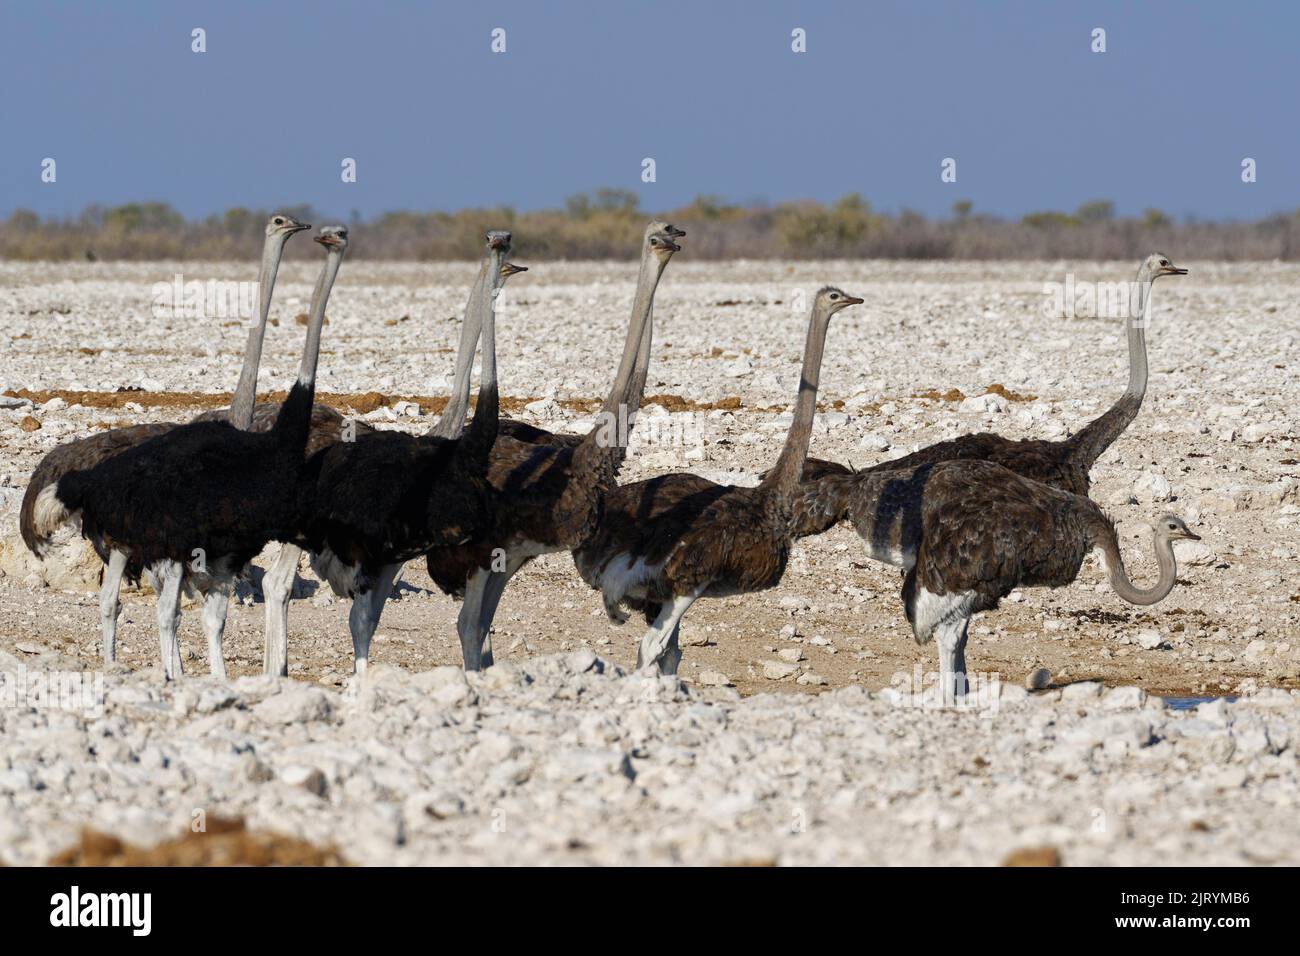 South African ostriches (Struthio camelus australis), herd, gathering of male and female adult ostriches at waterhole, Etosha National Park, Namibia, Stock Photo